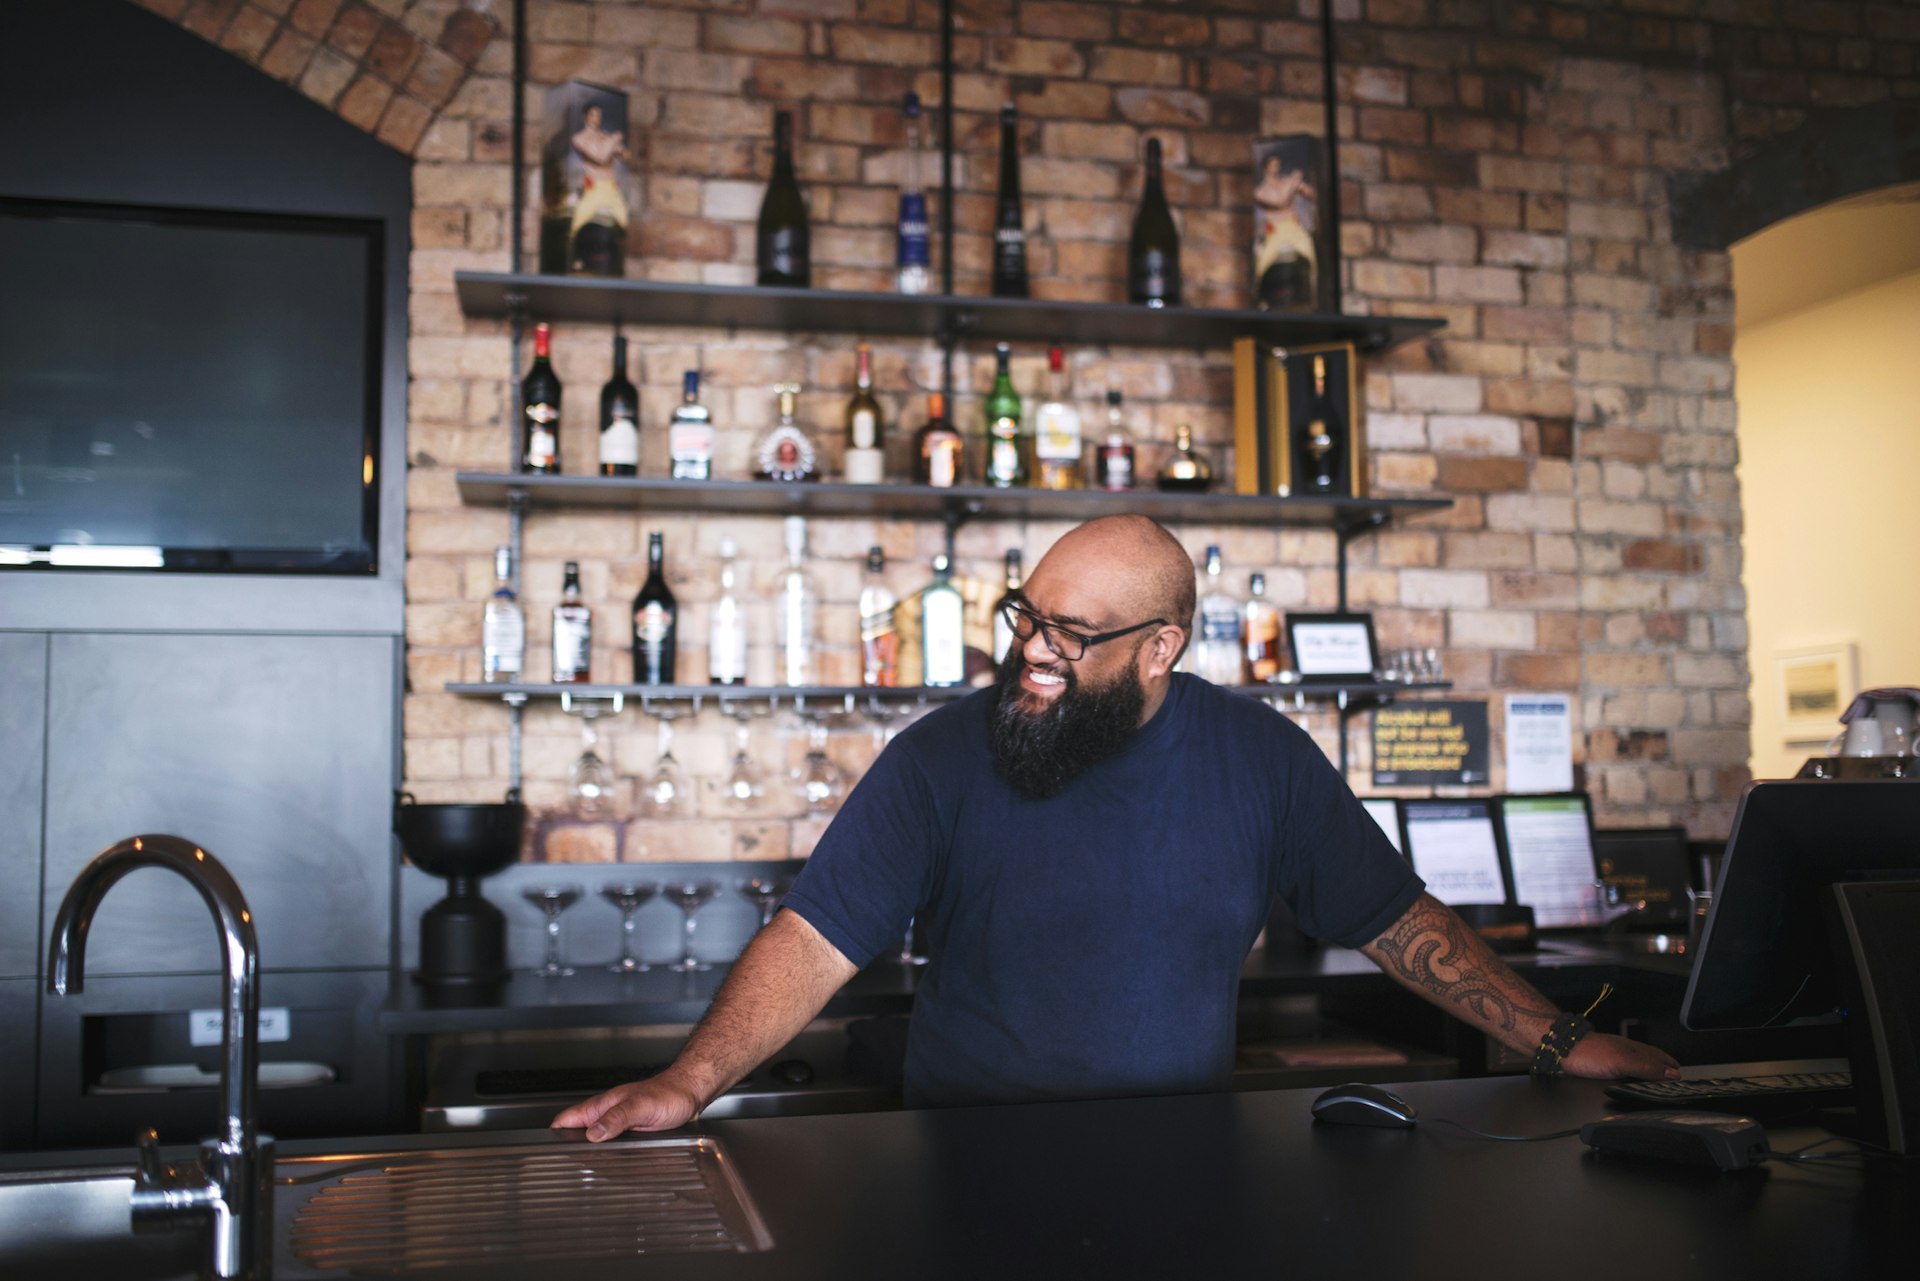 A barman stands with his hands on the bar smiling at a pub